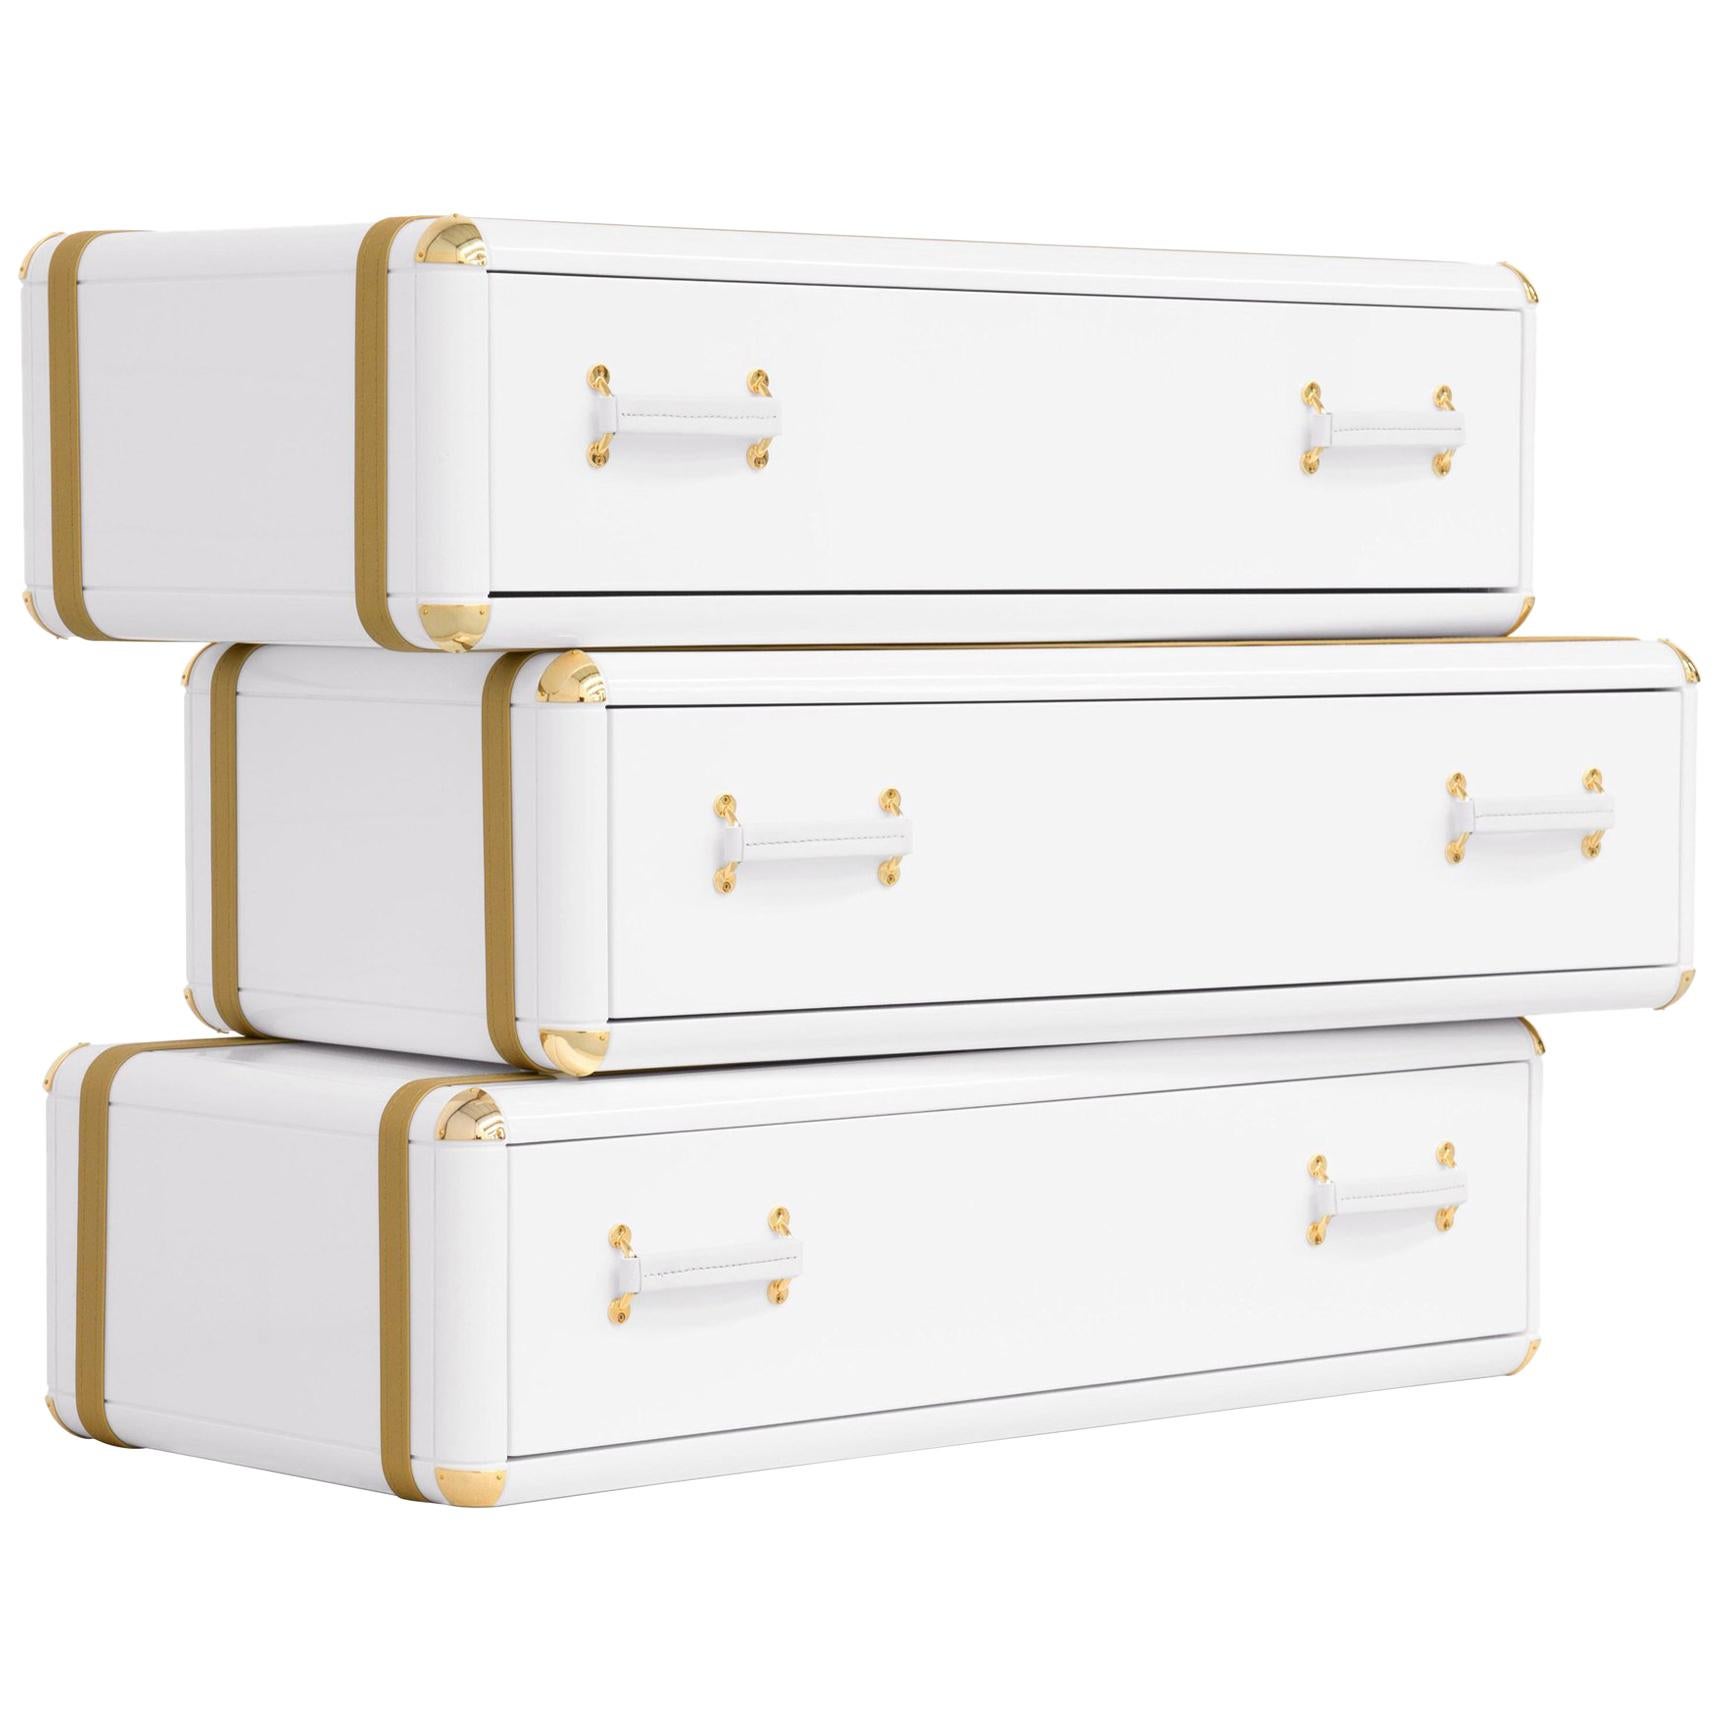 White Flight Case Shelf of 3 Drawers in White Lacquered Finish